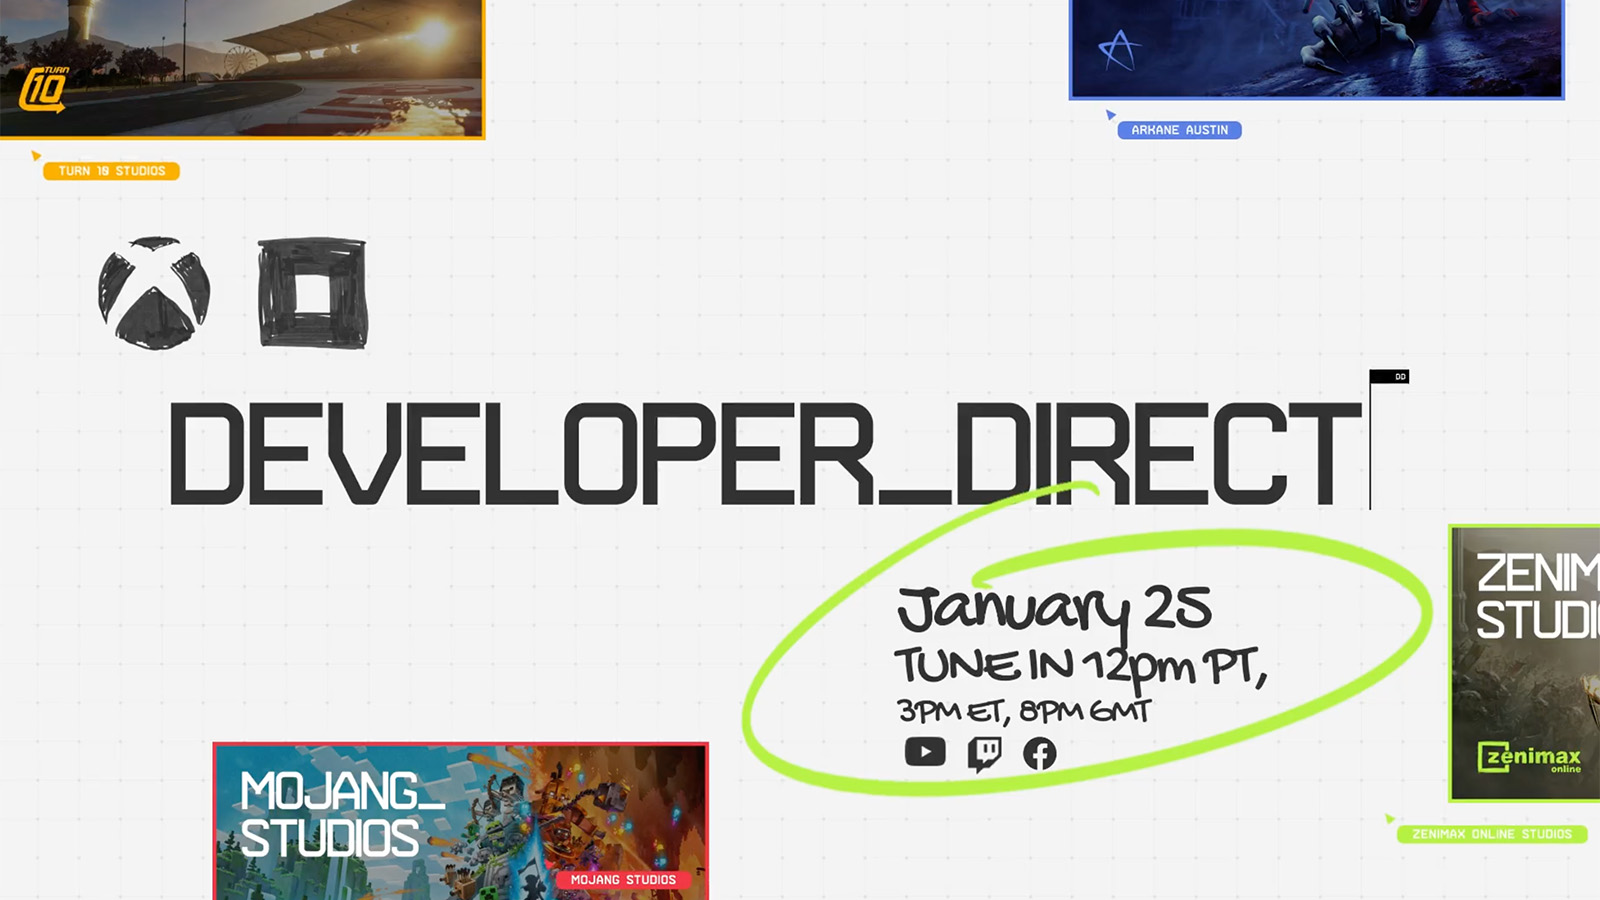 Xbox And Bethesda Developer_Direct Announced For January 25th